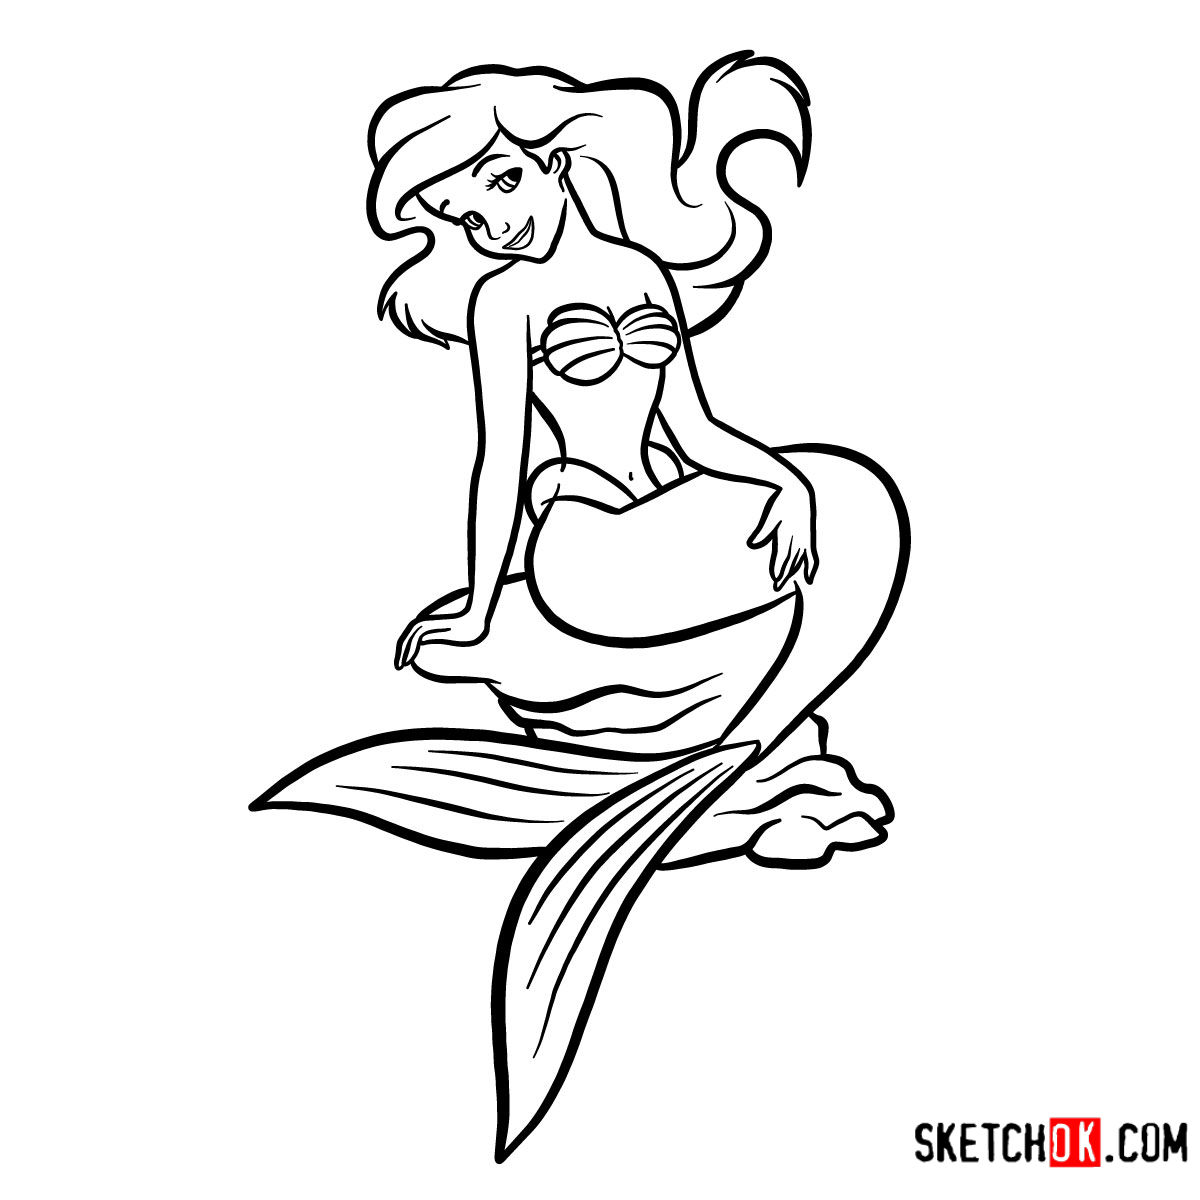 How to draw Ariel sitting on a stone